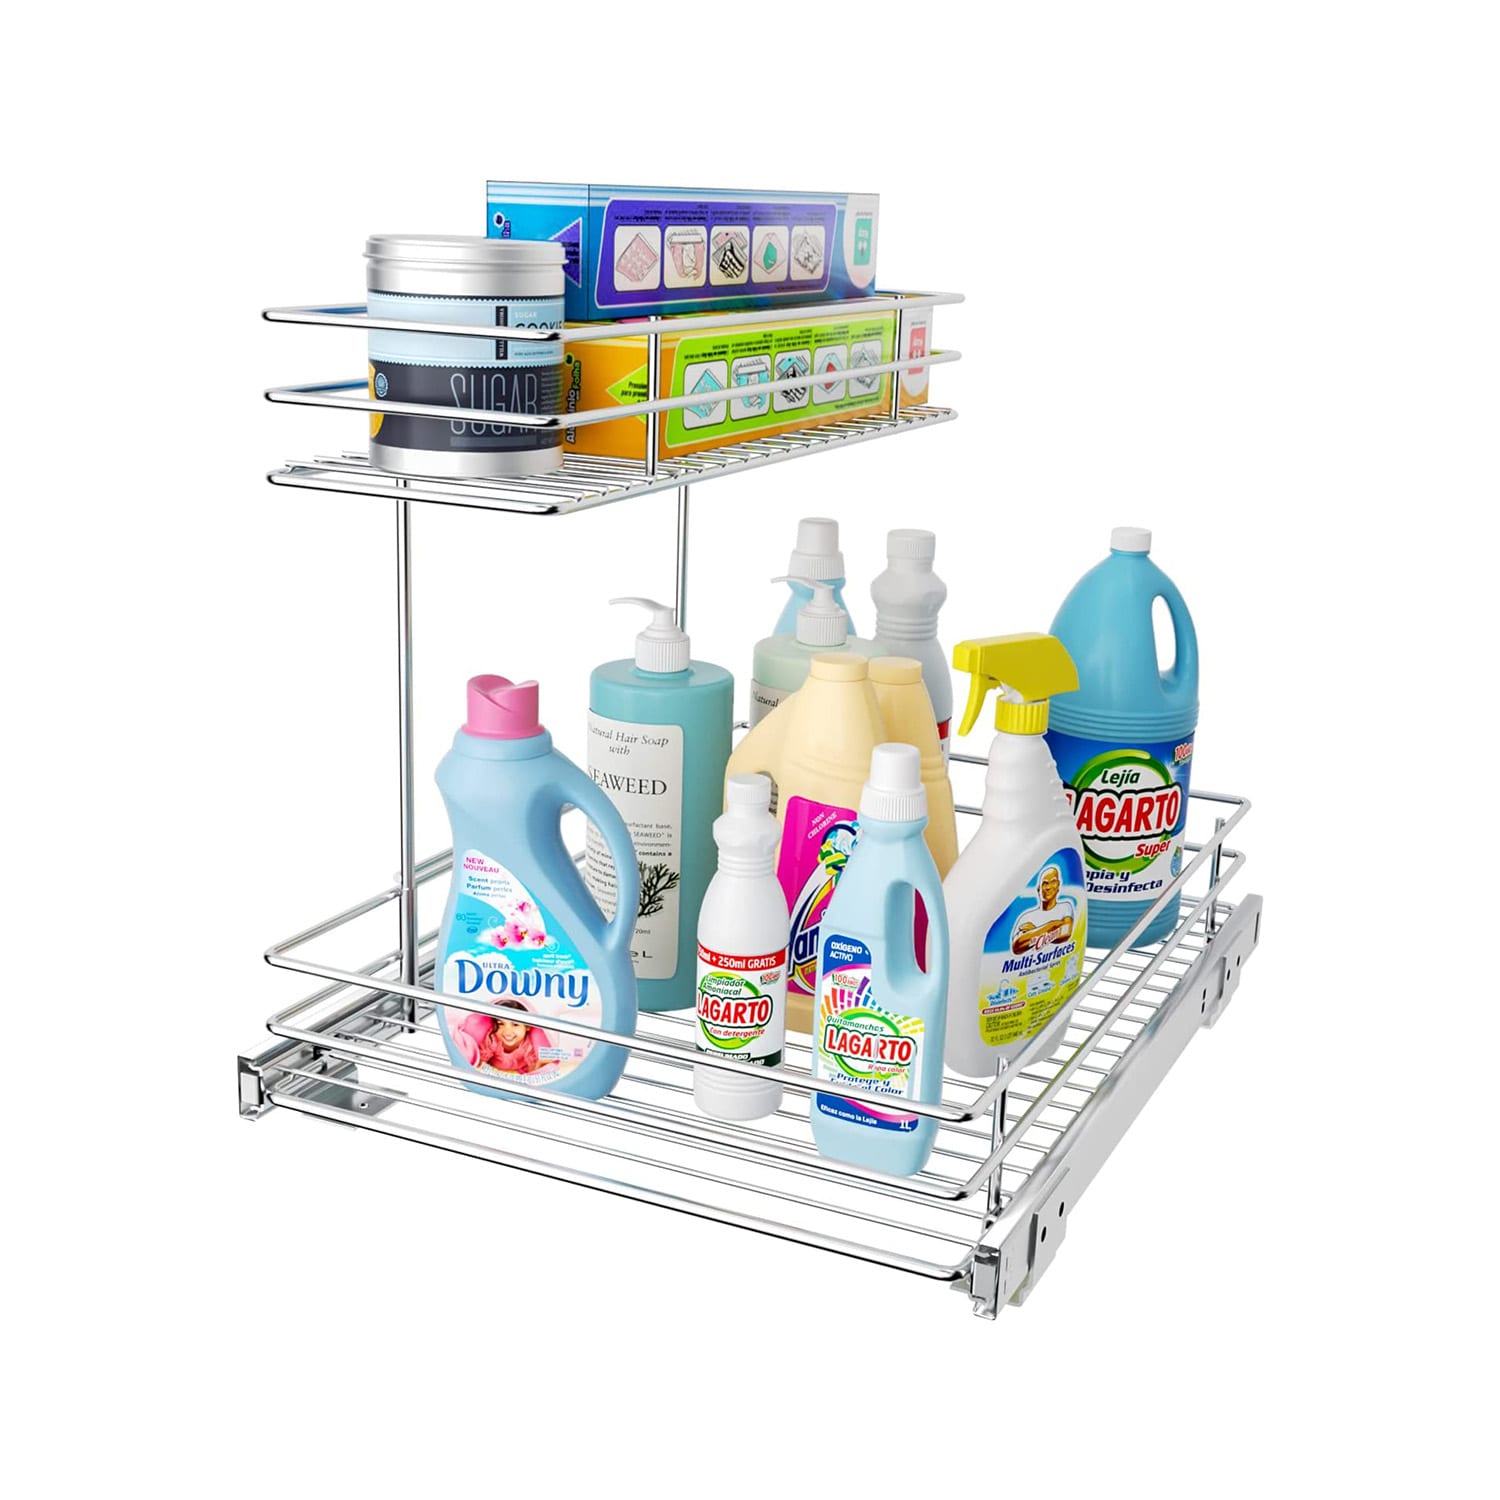 http://cdn.apartmenttherapy.info/image/upload/v1684368446/at/style/2023-05/5-19-editors-picks/g-ting-pull-out-cabinet-organizer.jpg